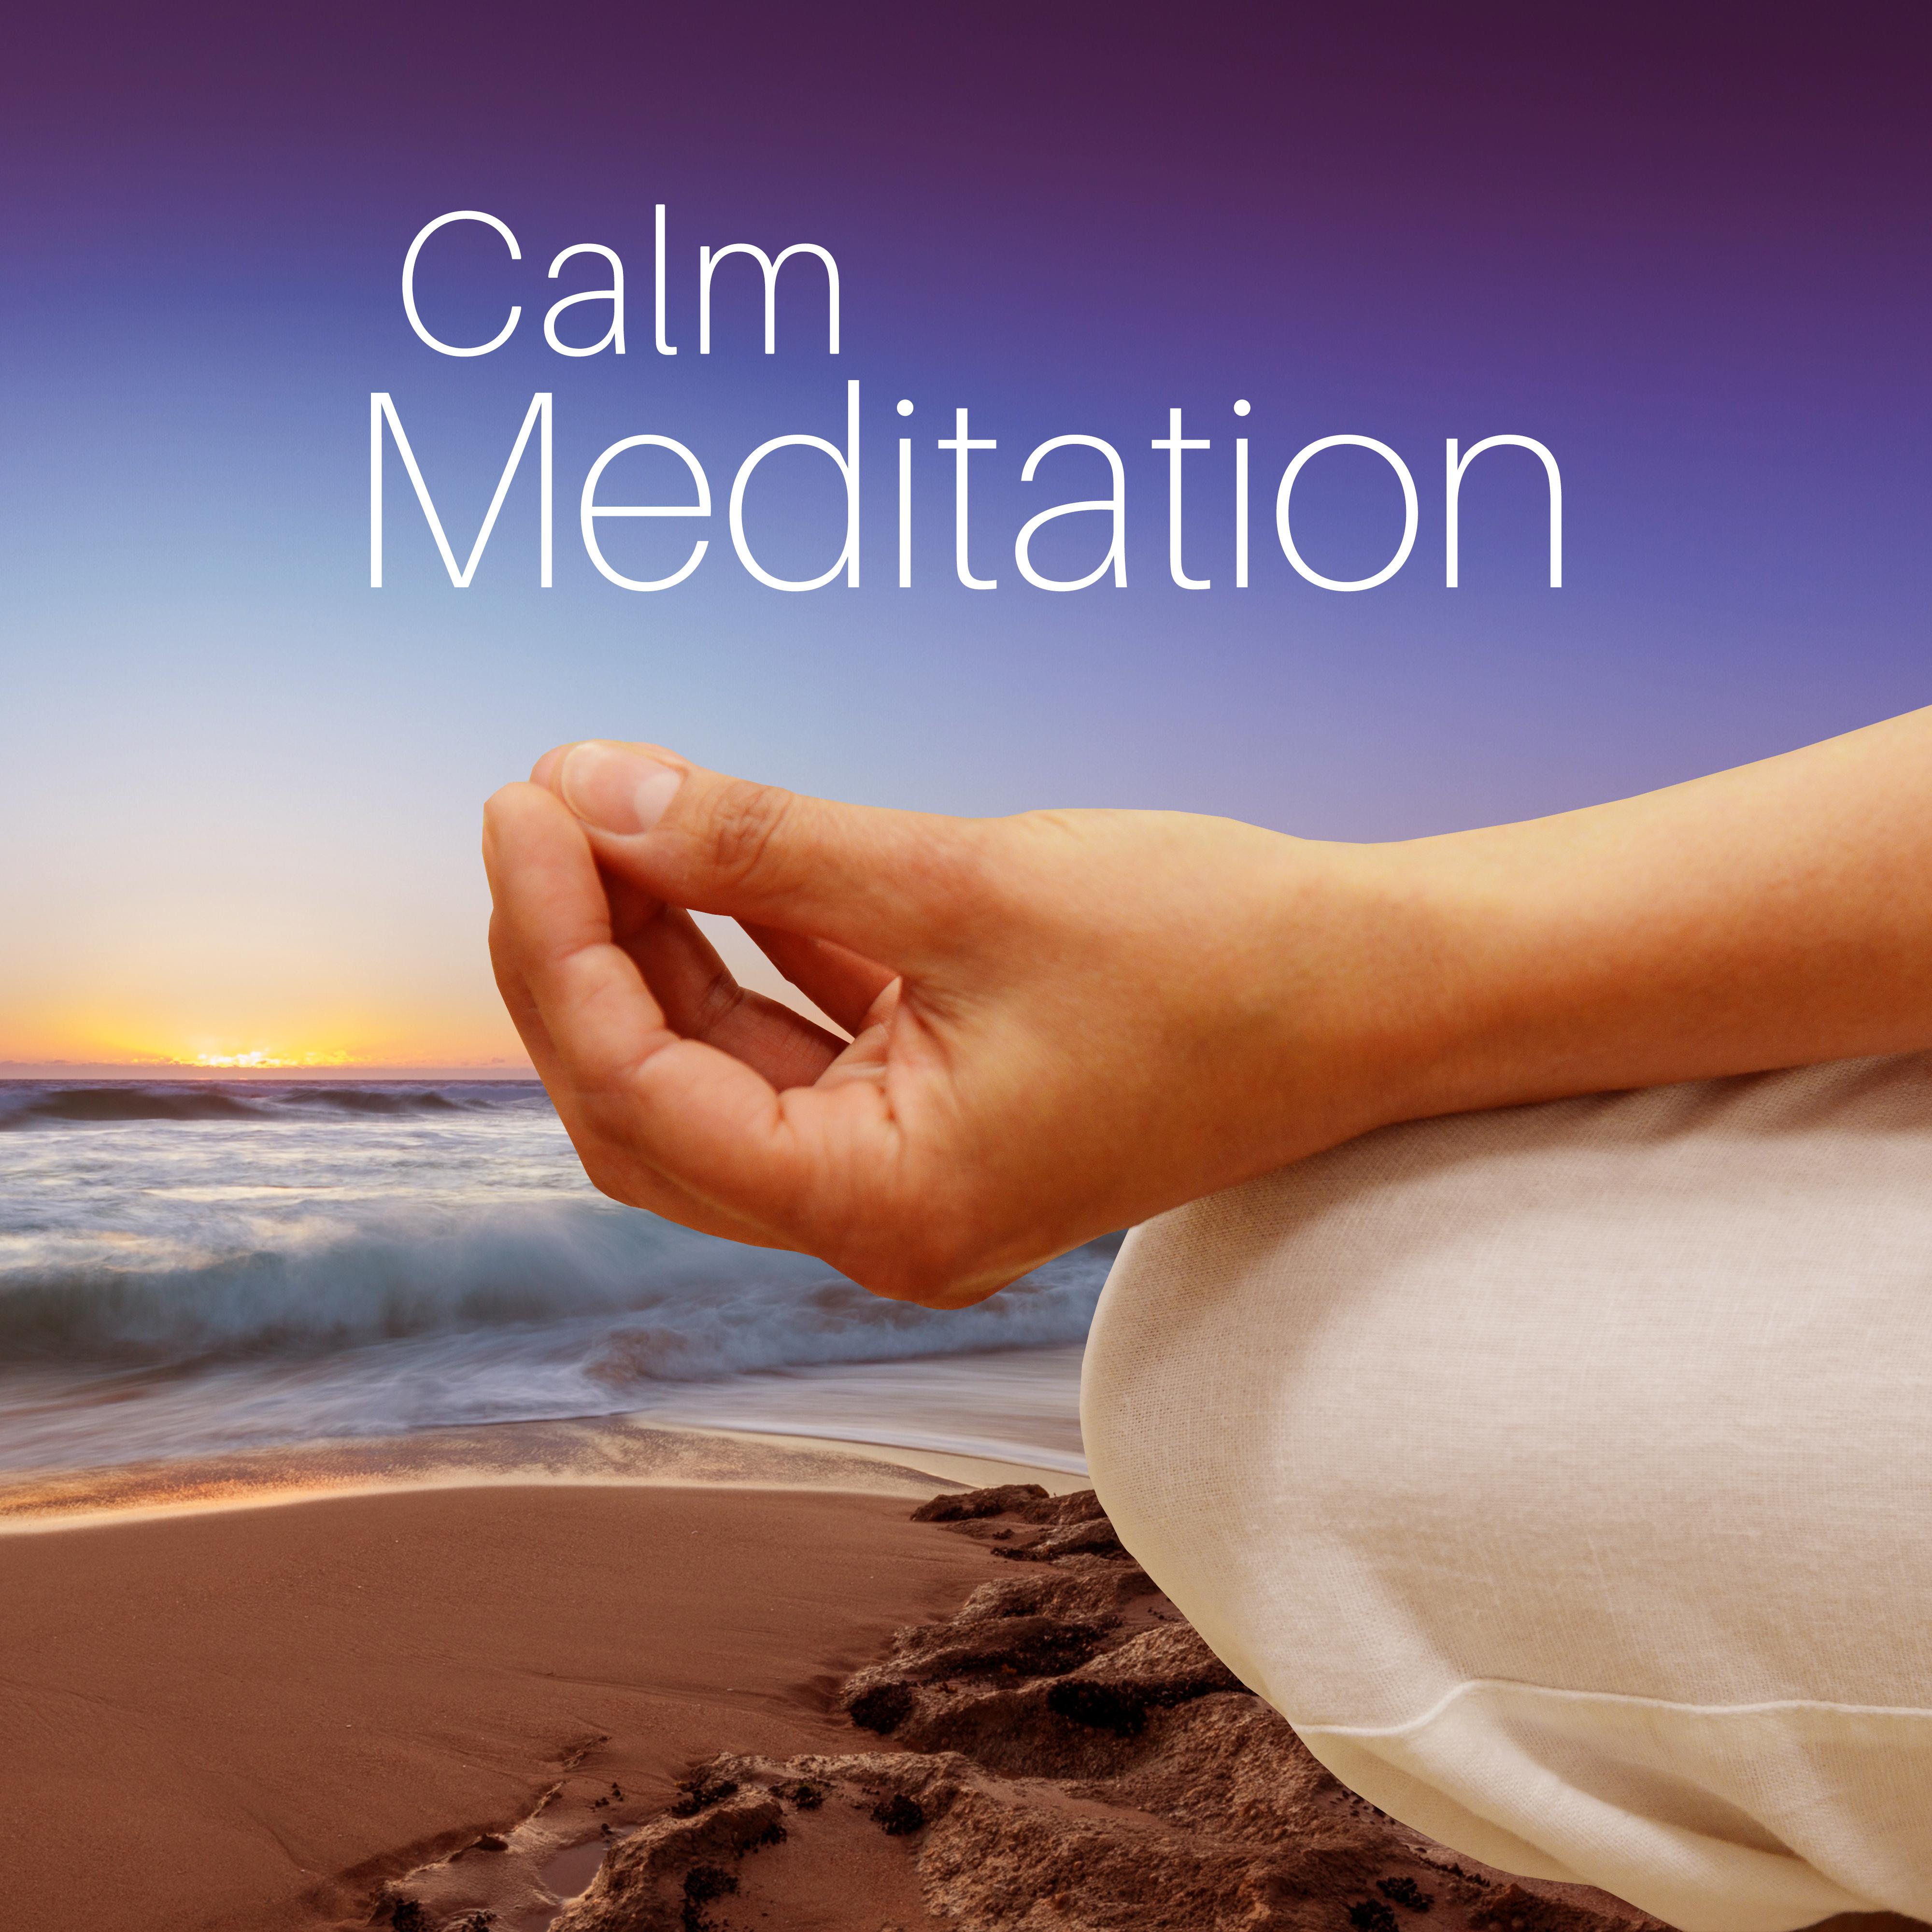 Calm Meditation  Relax  Meditate with New Age Music, Deep Relaxation, Relief Stress  Feel Better